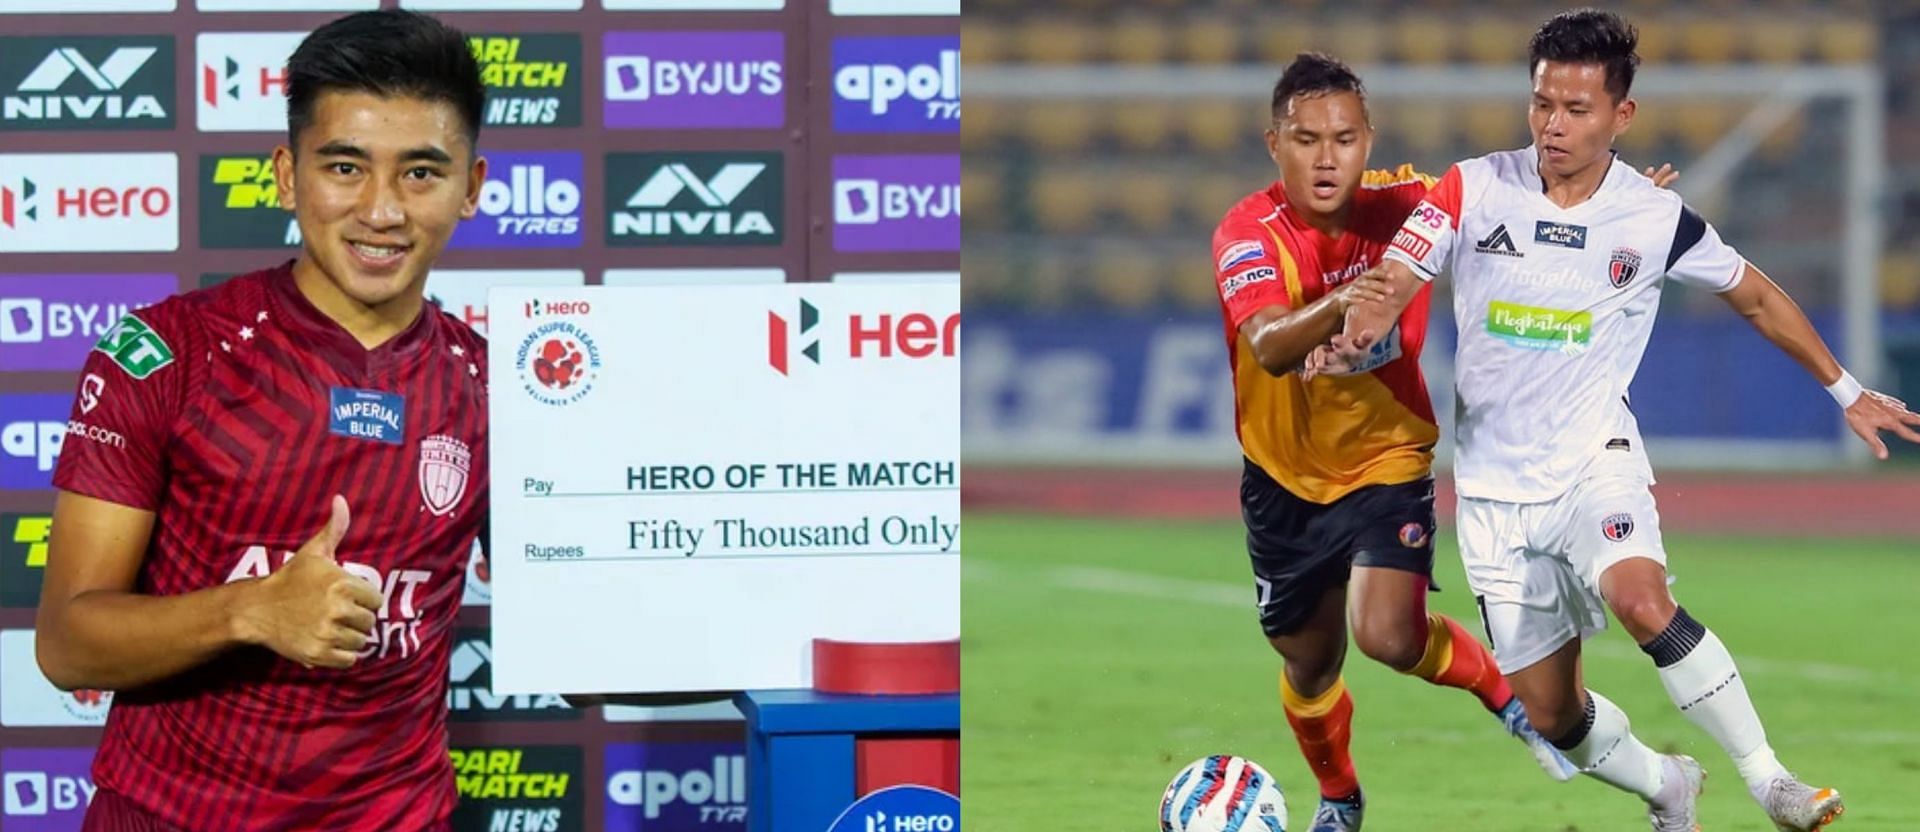 Mohammedan Sporting Club has completed the signings of Aizawl FC defender Joe Zoherliana and NorthEast United FC winger Rochharzela on three-year contracts